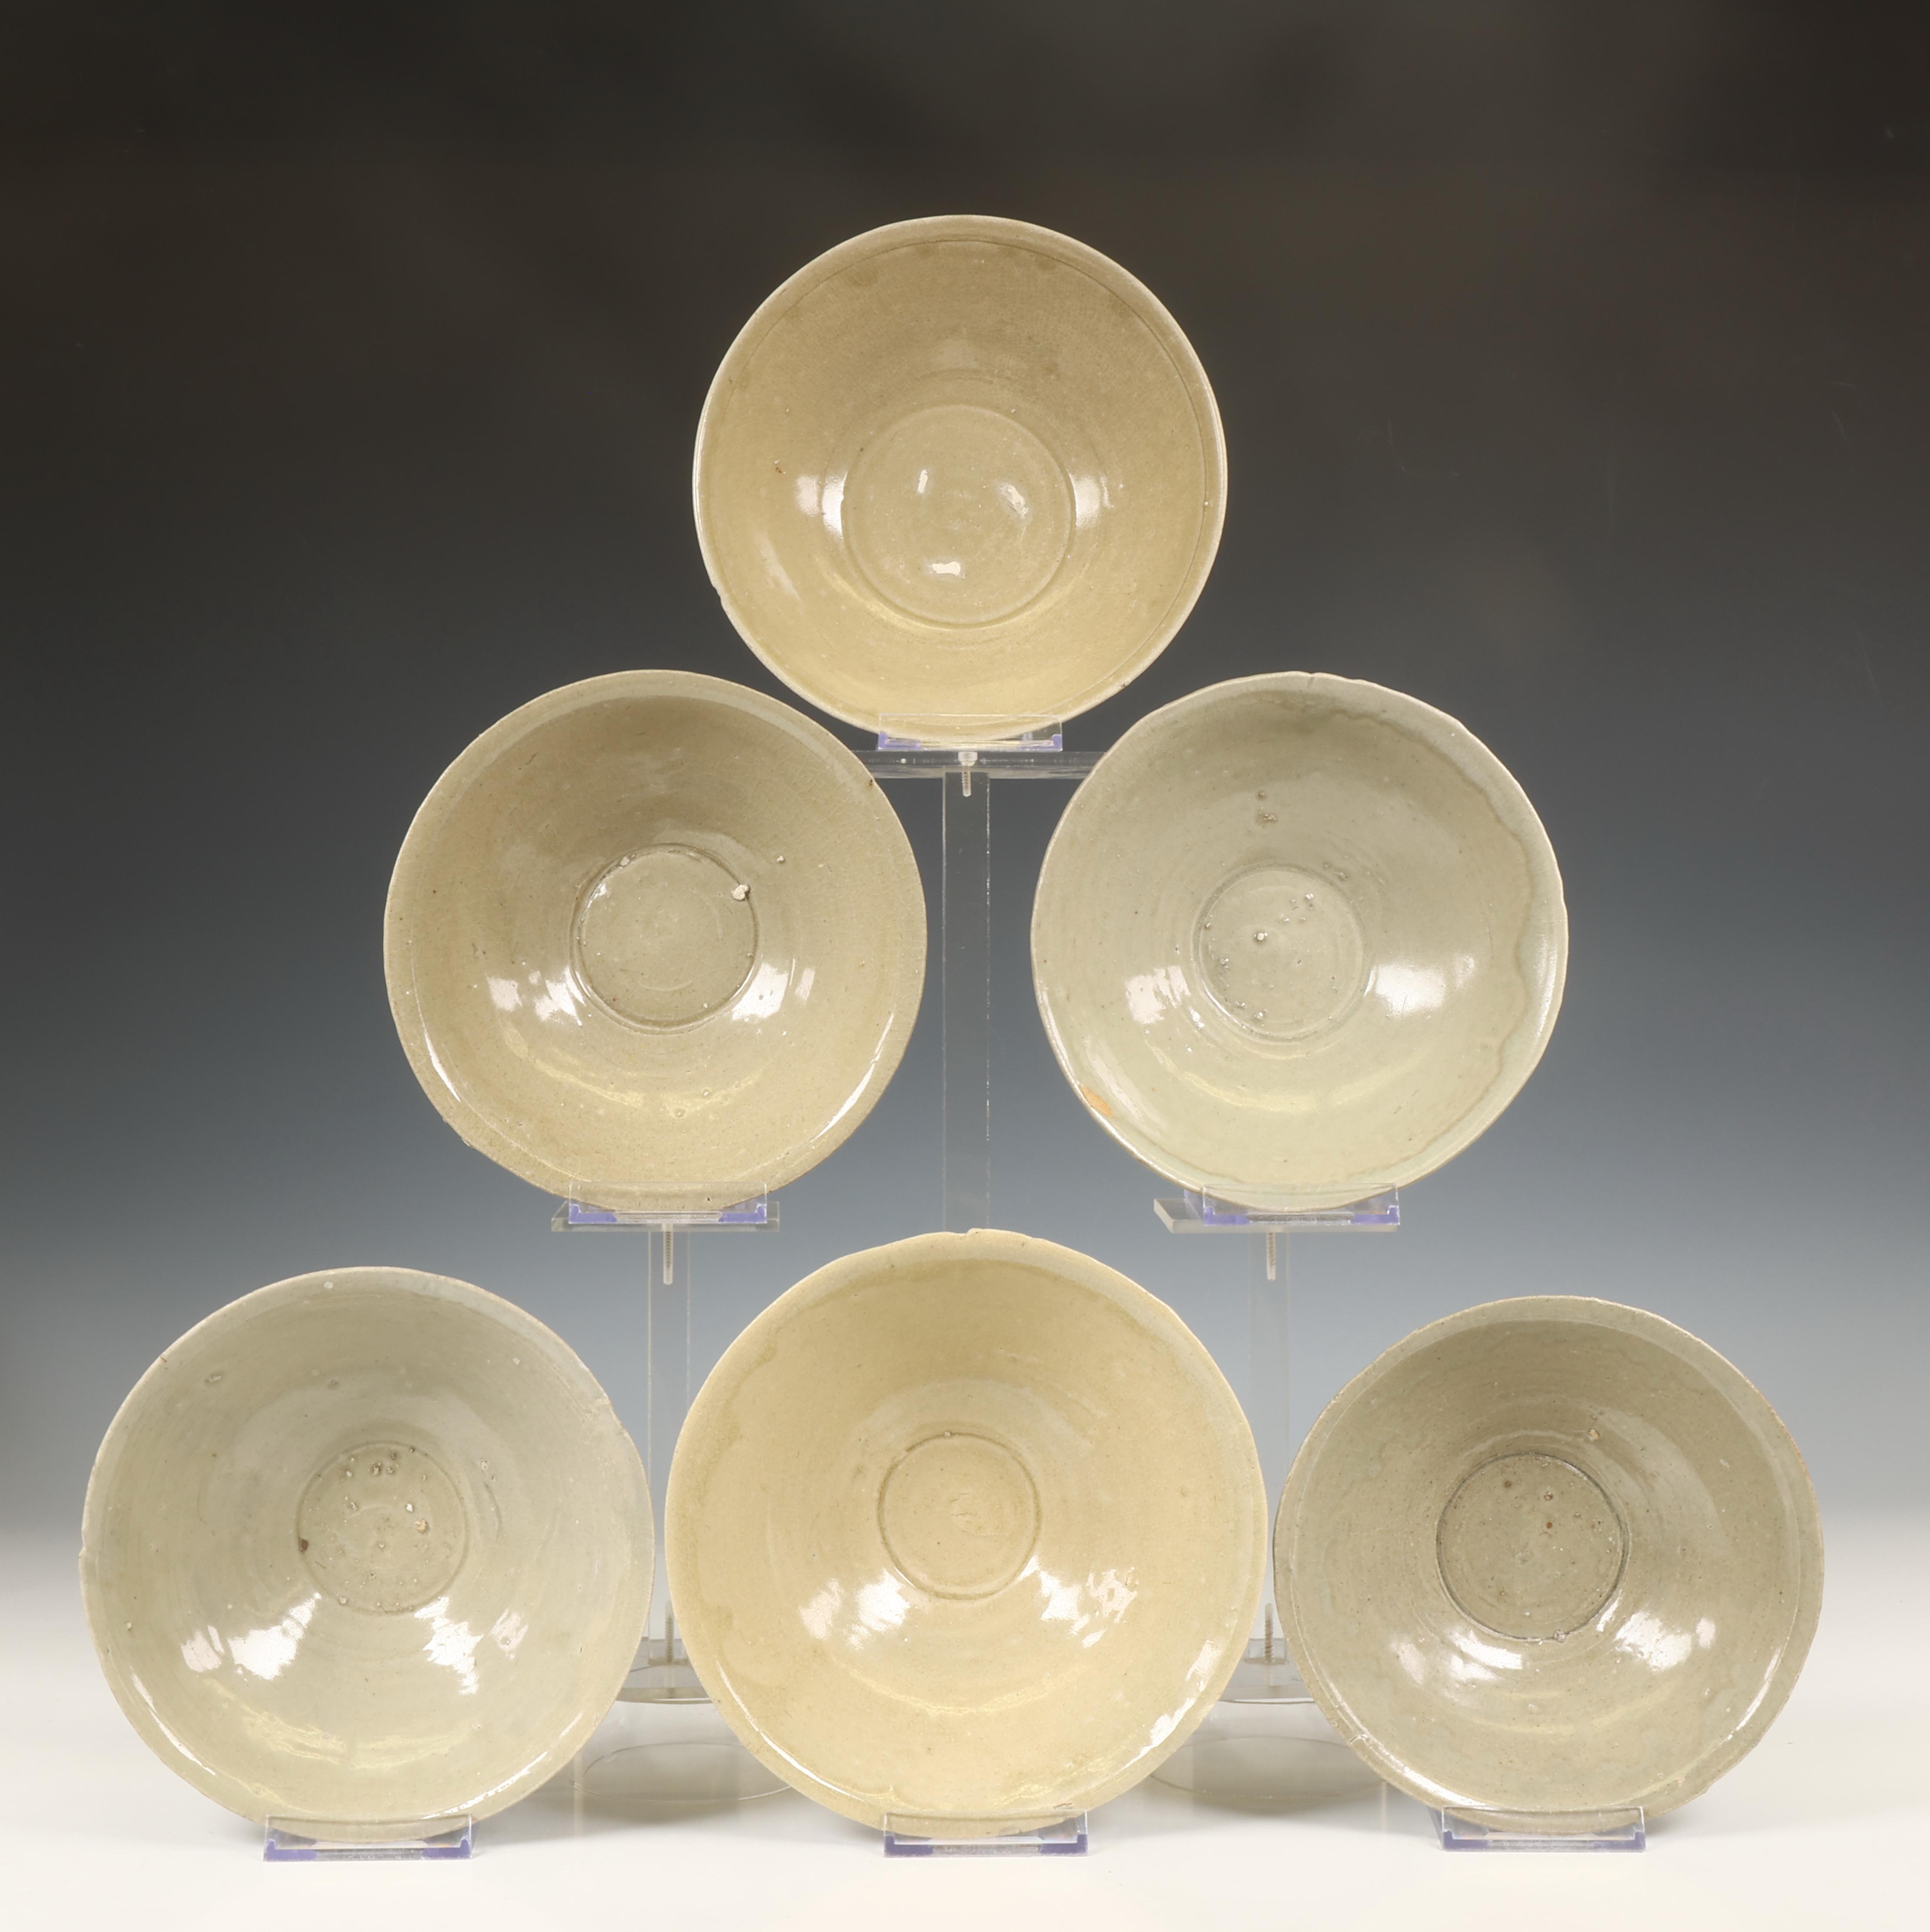 China, collection of eighteen celadon-glazed bowls, Northern Song dynasty, 10th-12th century, - Image 3 of 7